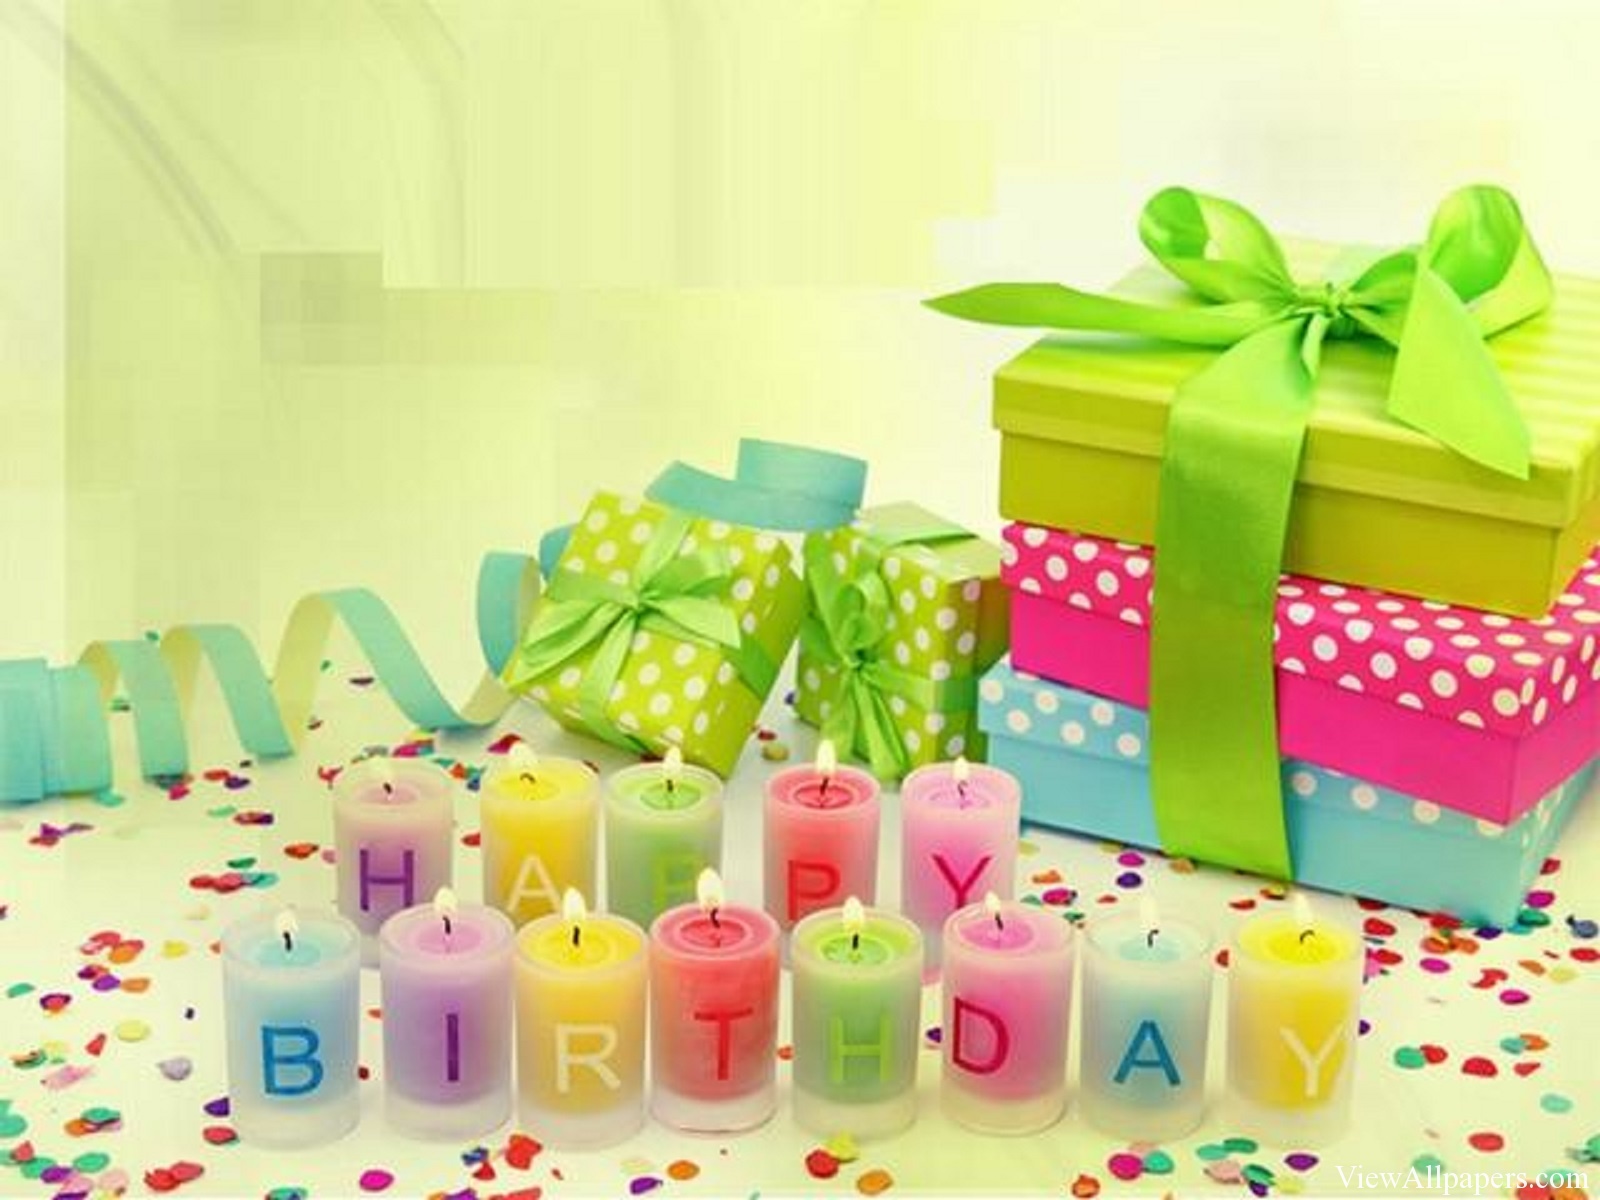 Happy Birthday Candles And Presents | Birthday HD Wallpapers